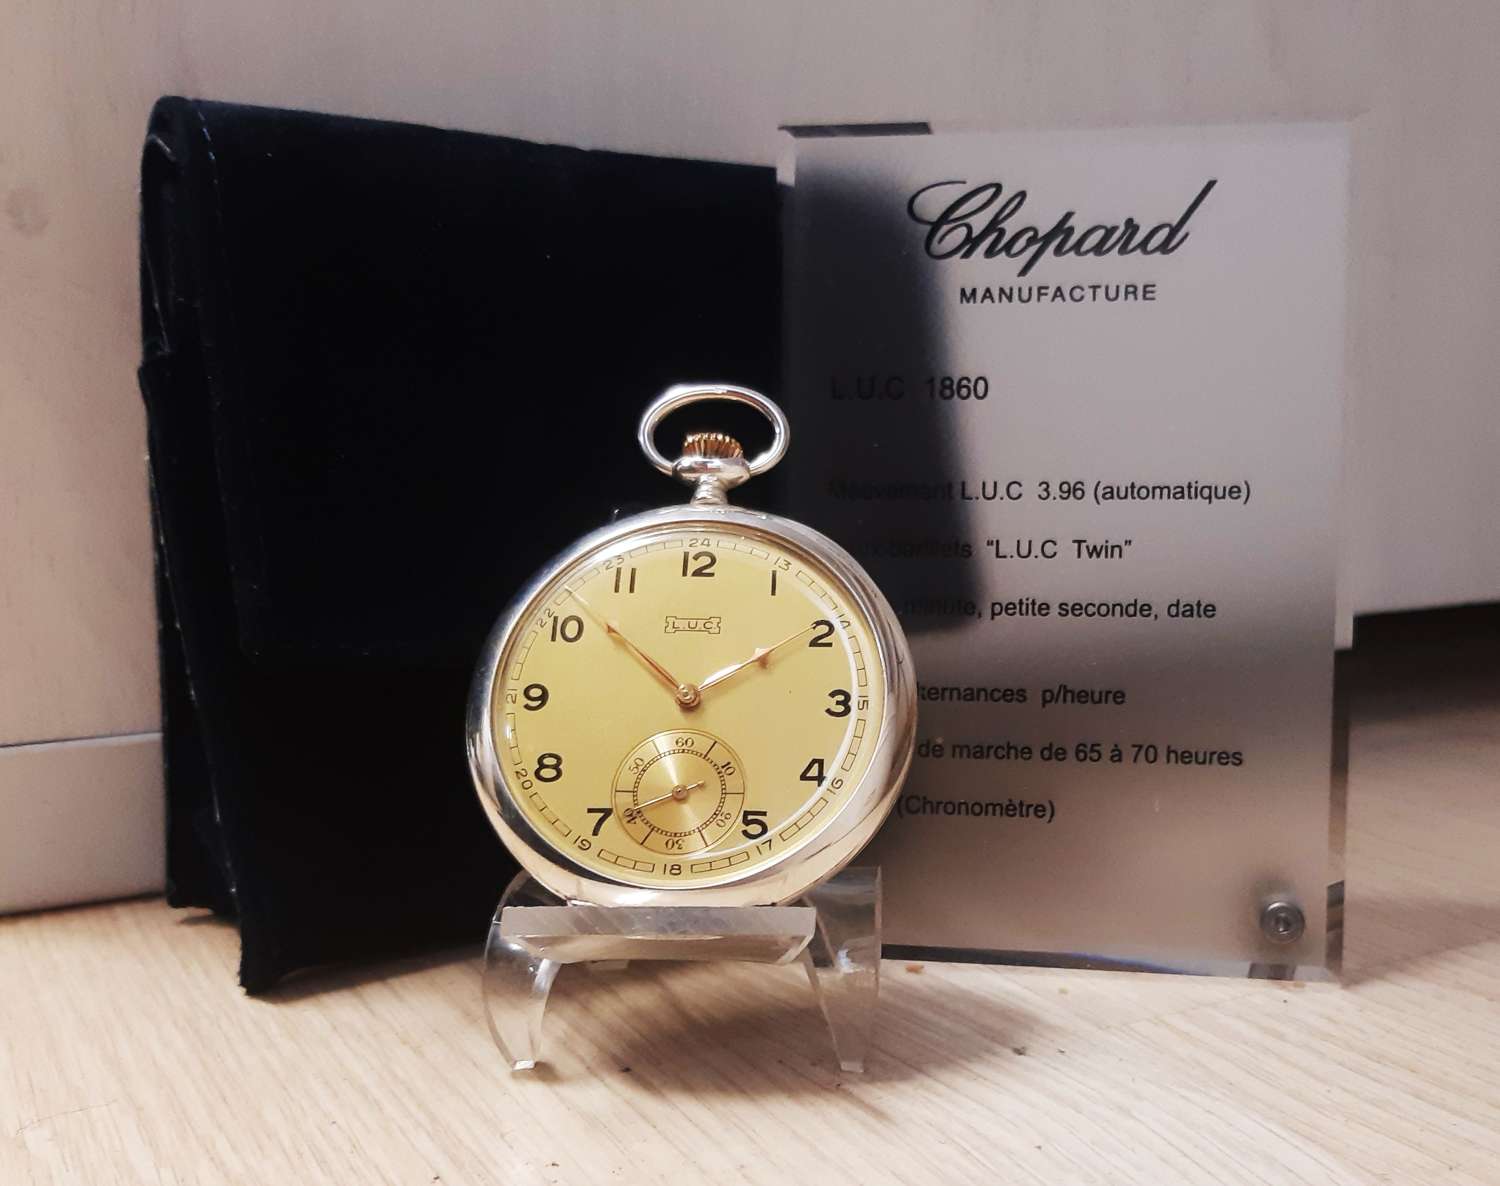 Antique Silver 0.800 LUC Chopard Pocket Watch with Case and Plaque